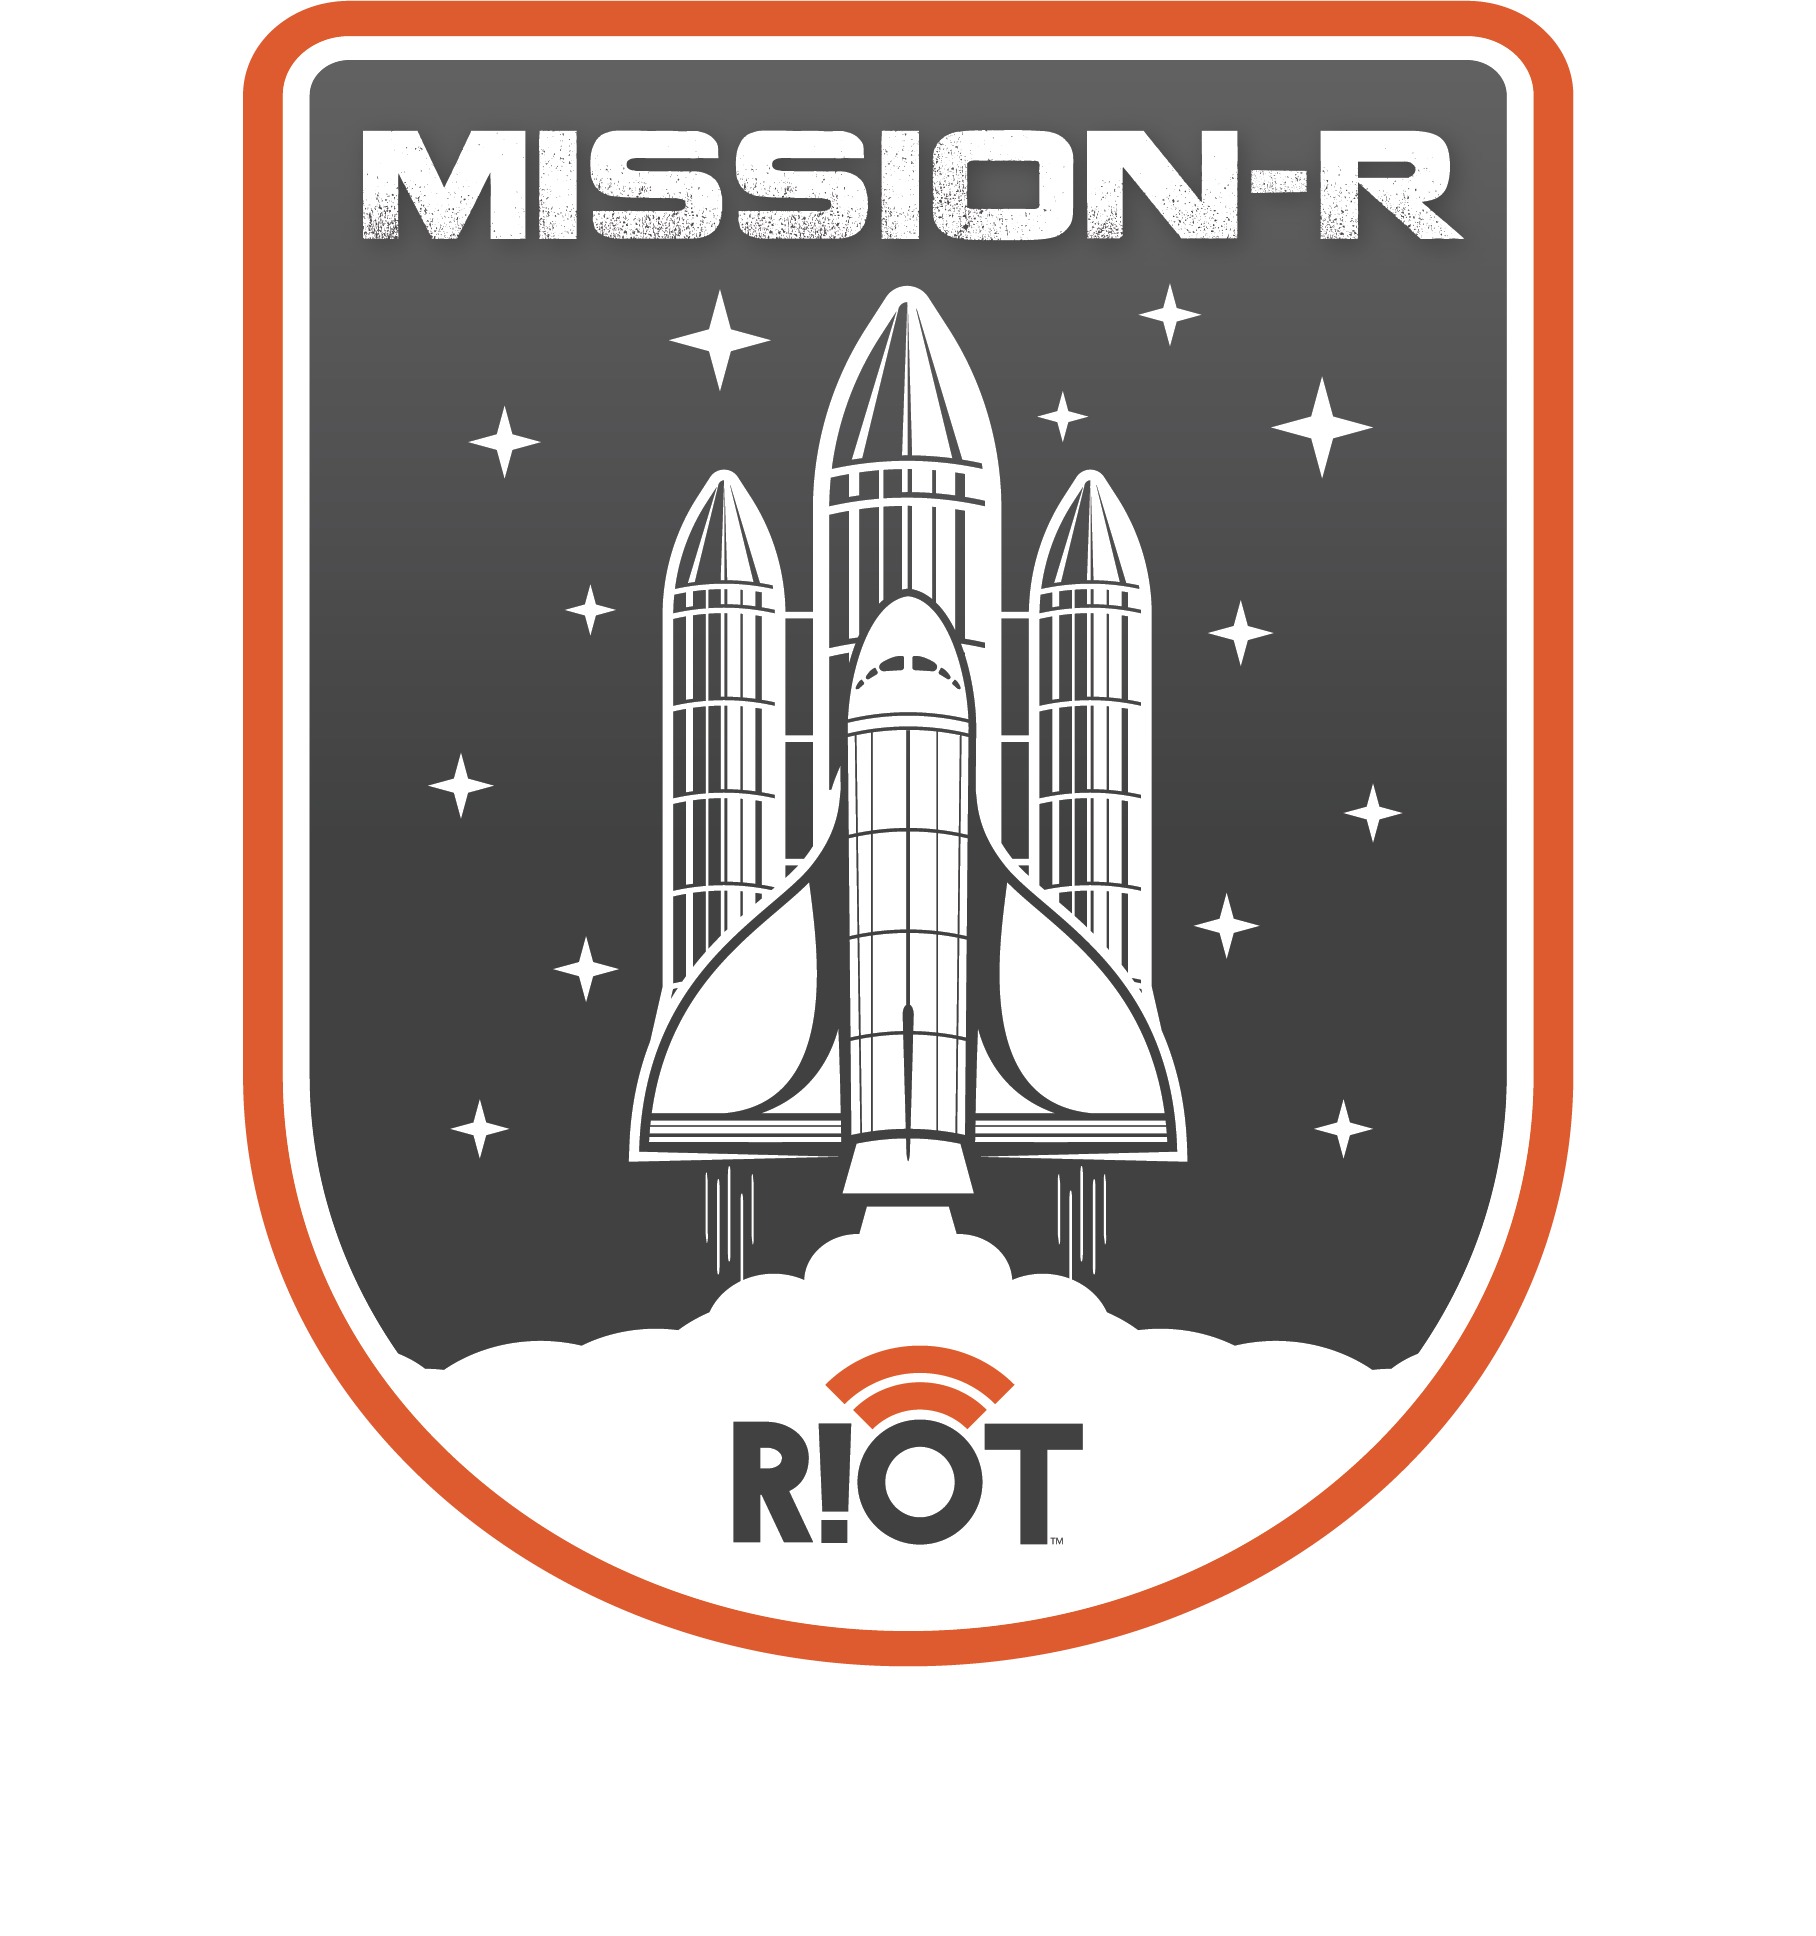 Enabling the Spirit of Invention in Times of Crisis: RIoT Launches MISSION-R